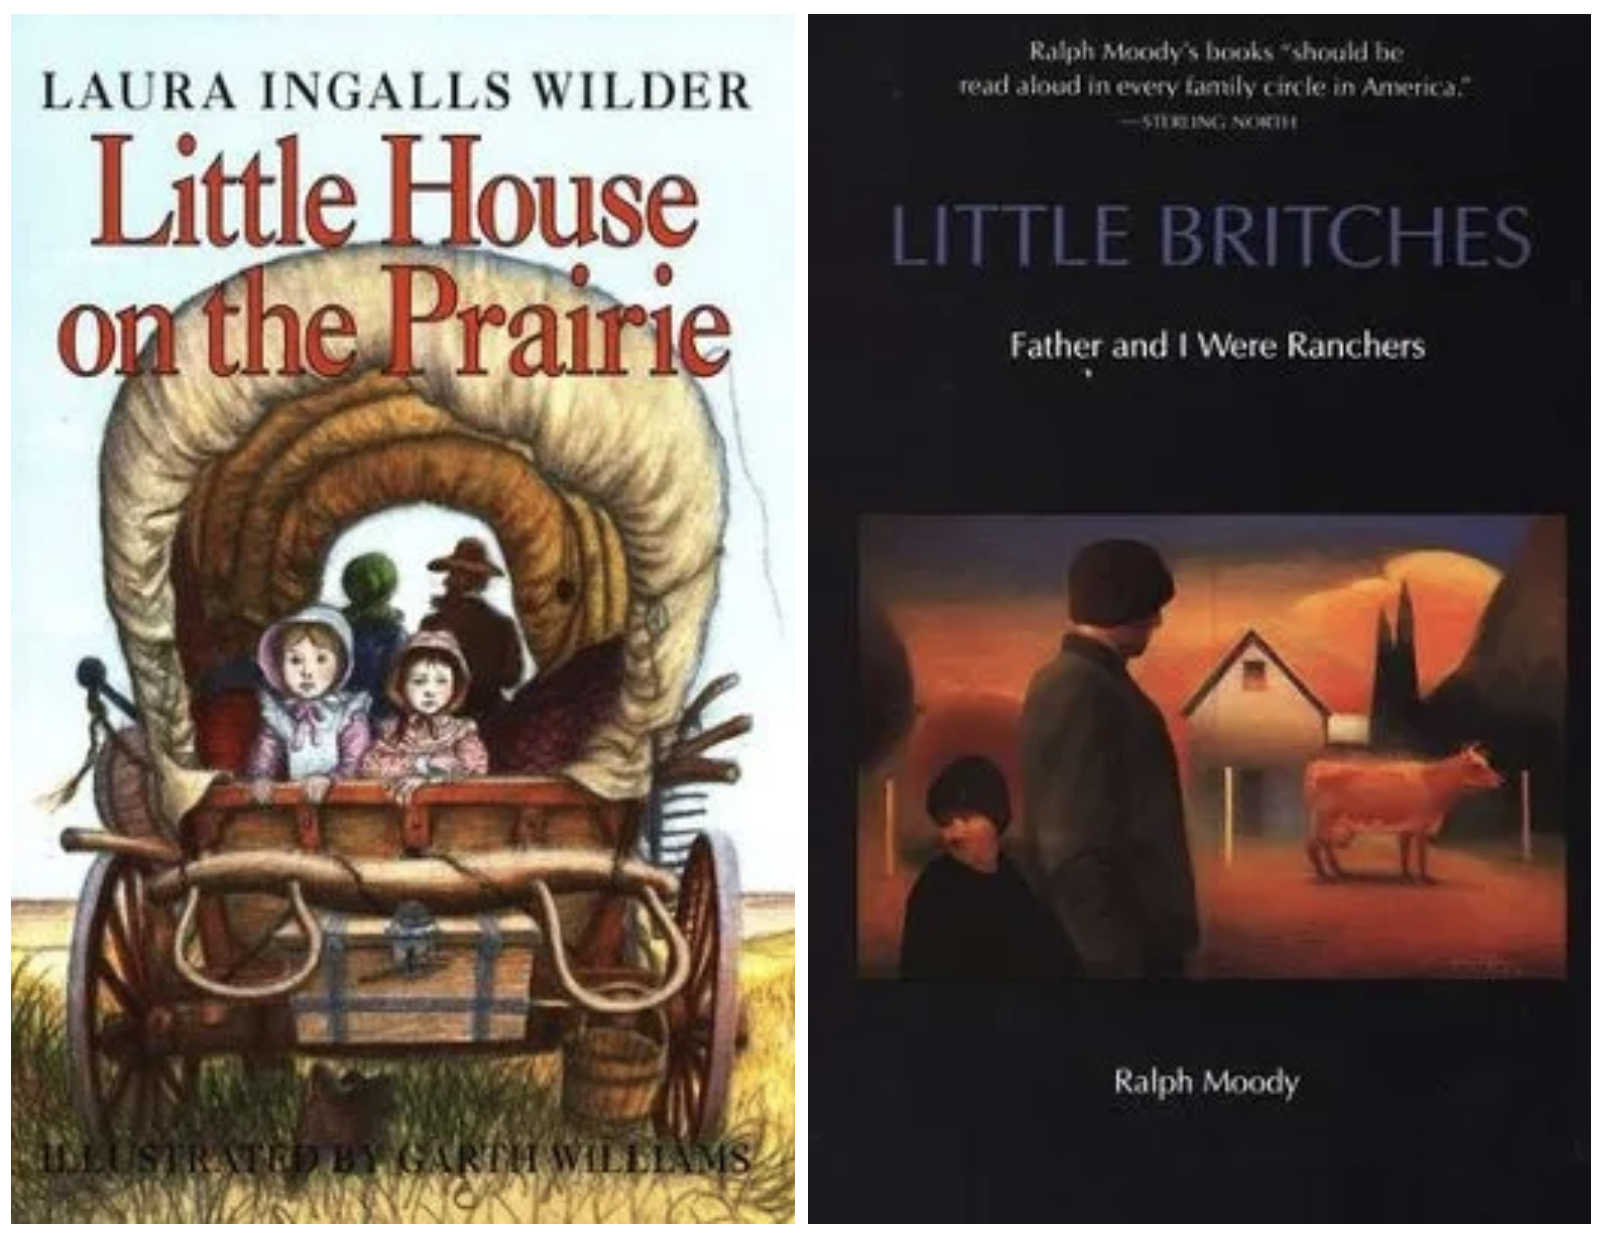 Even better than “Little House”? Little Britches by Ralph Moody